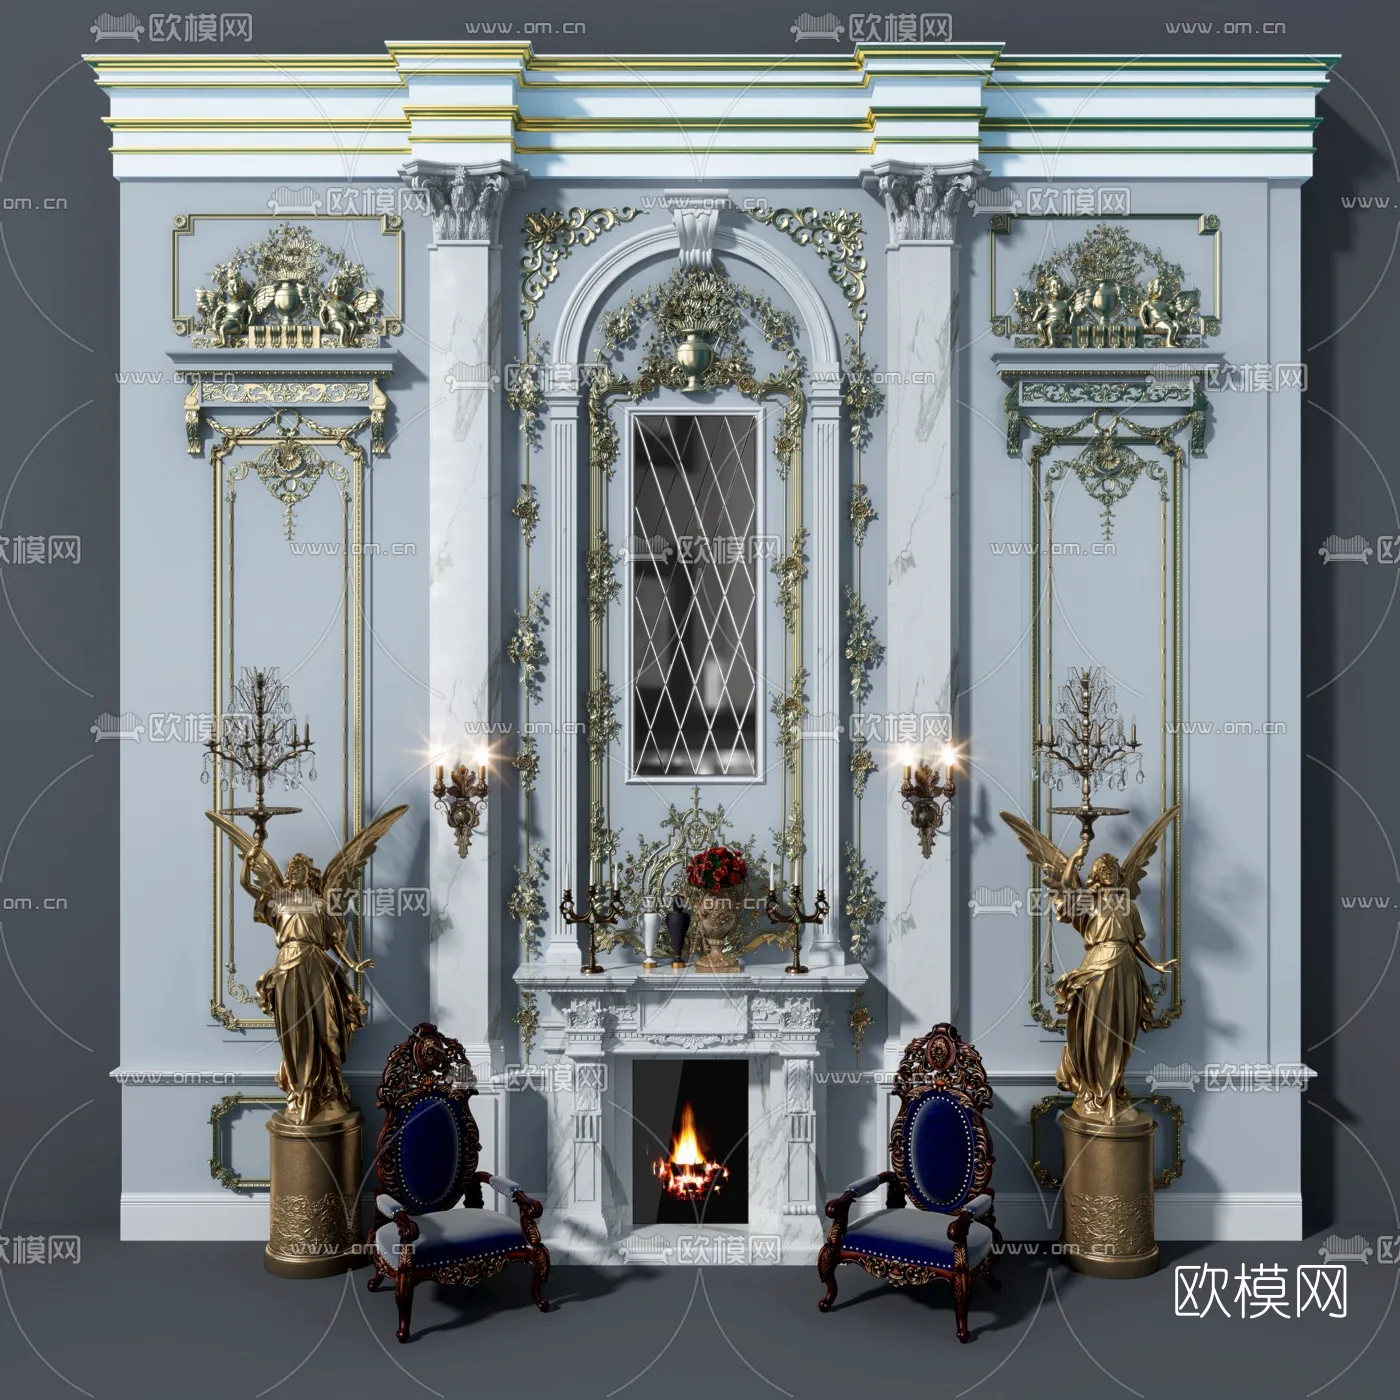 CLASSIC – FIREPLACE 3DMODELS – 008